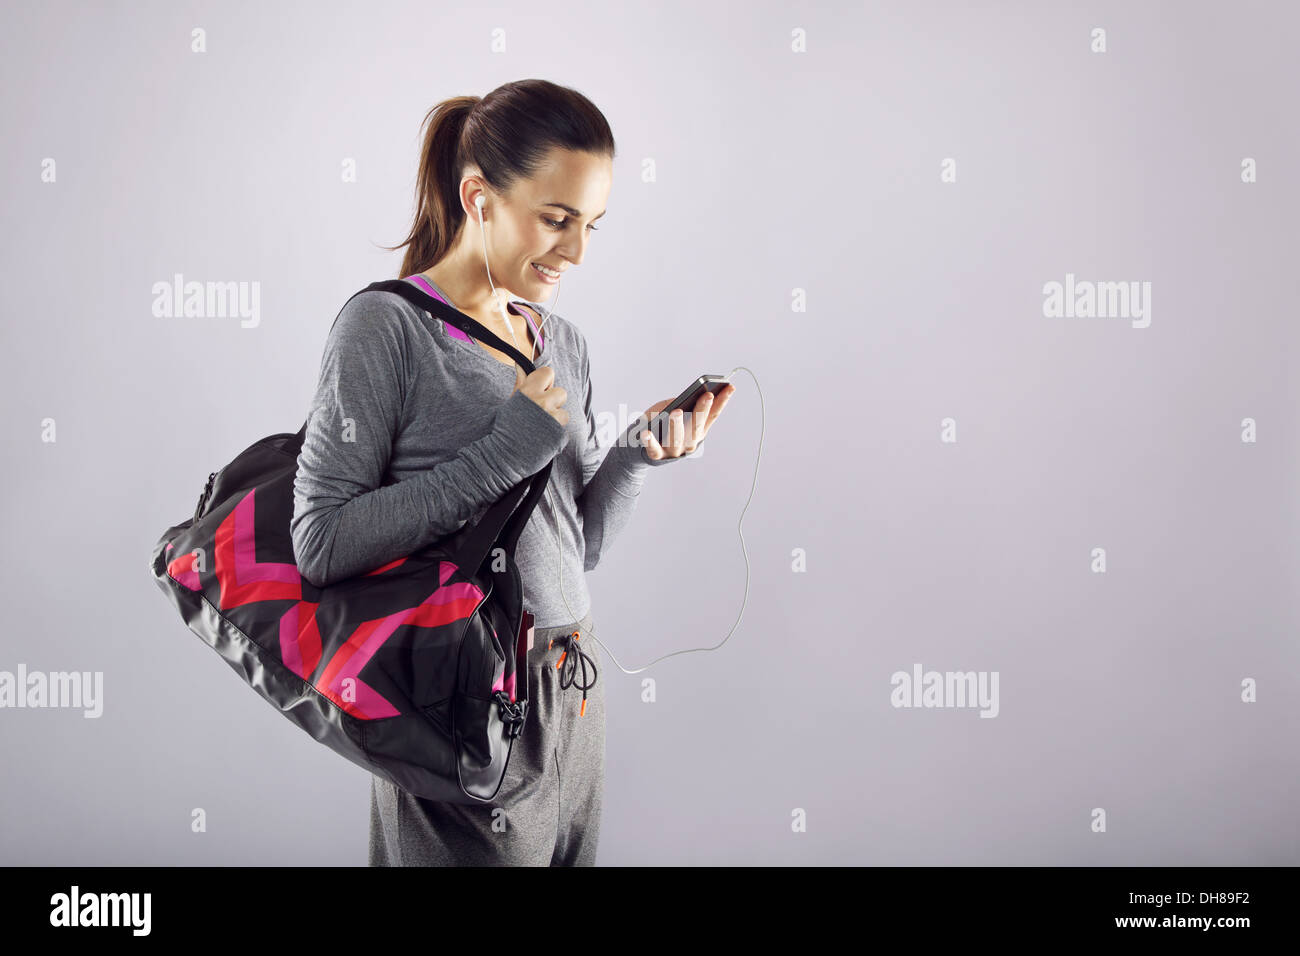 Good looking female athlete with a sports bag listening to music on her mobile phone. Fitness woman in sports clothing Stock Photo